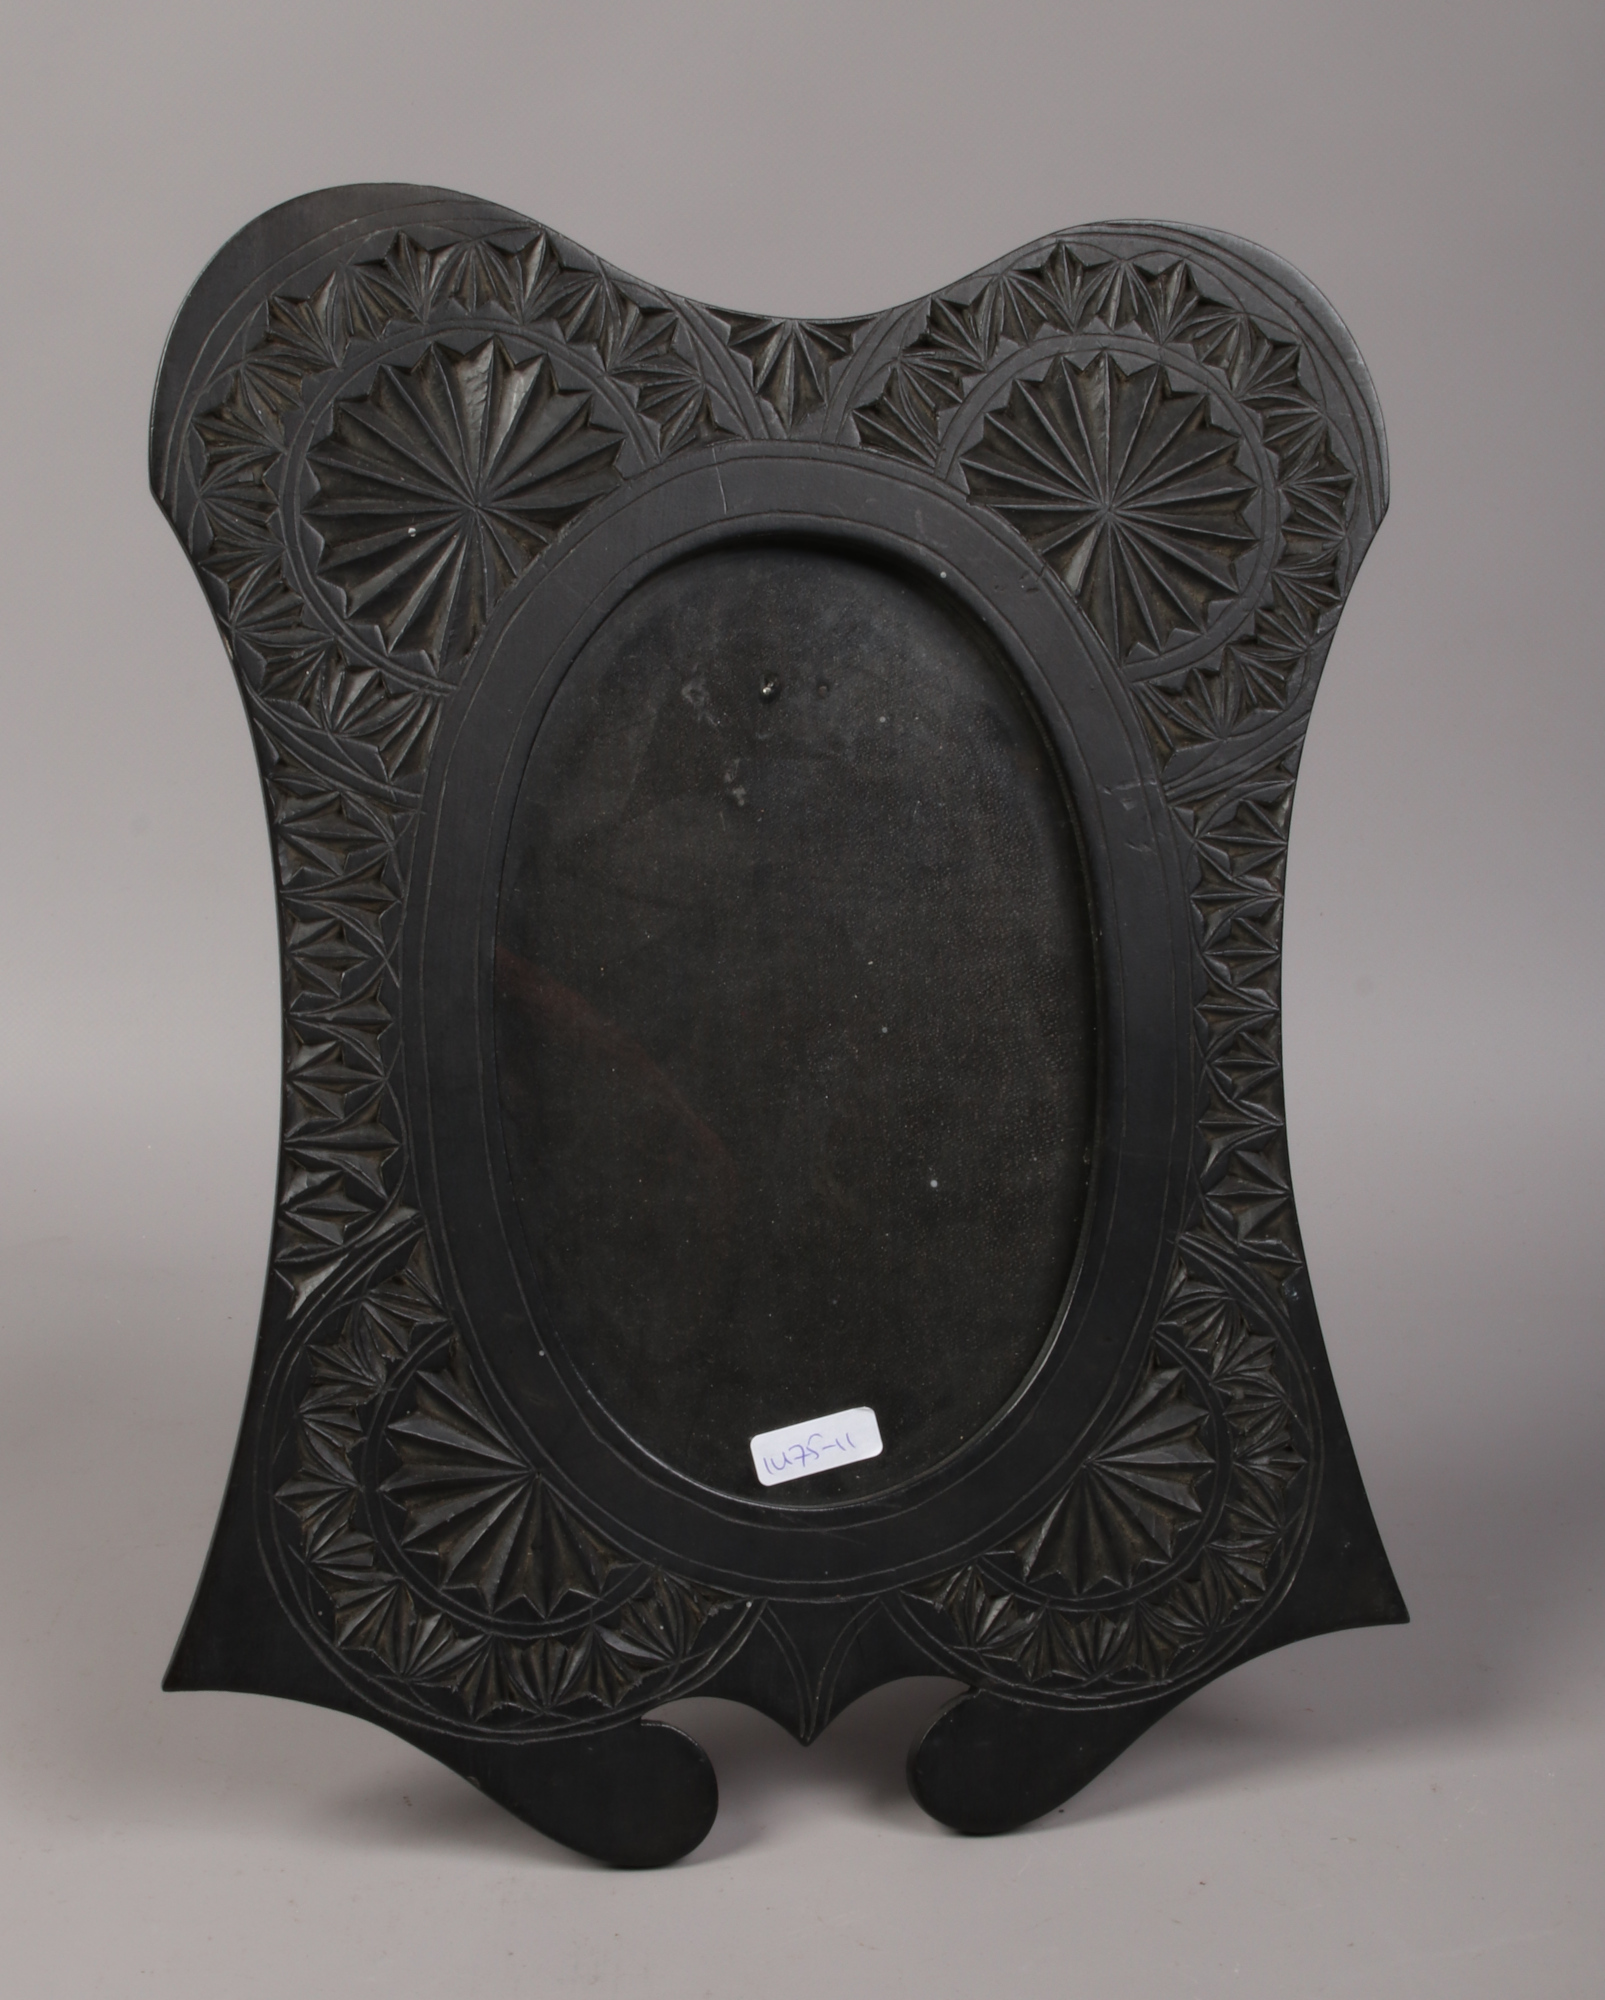 An Anglo Indian carved and ebonised strut photo frame.